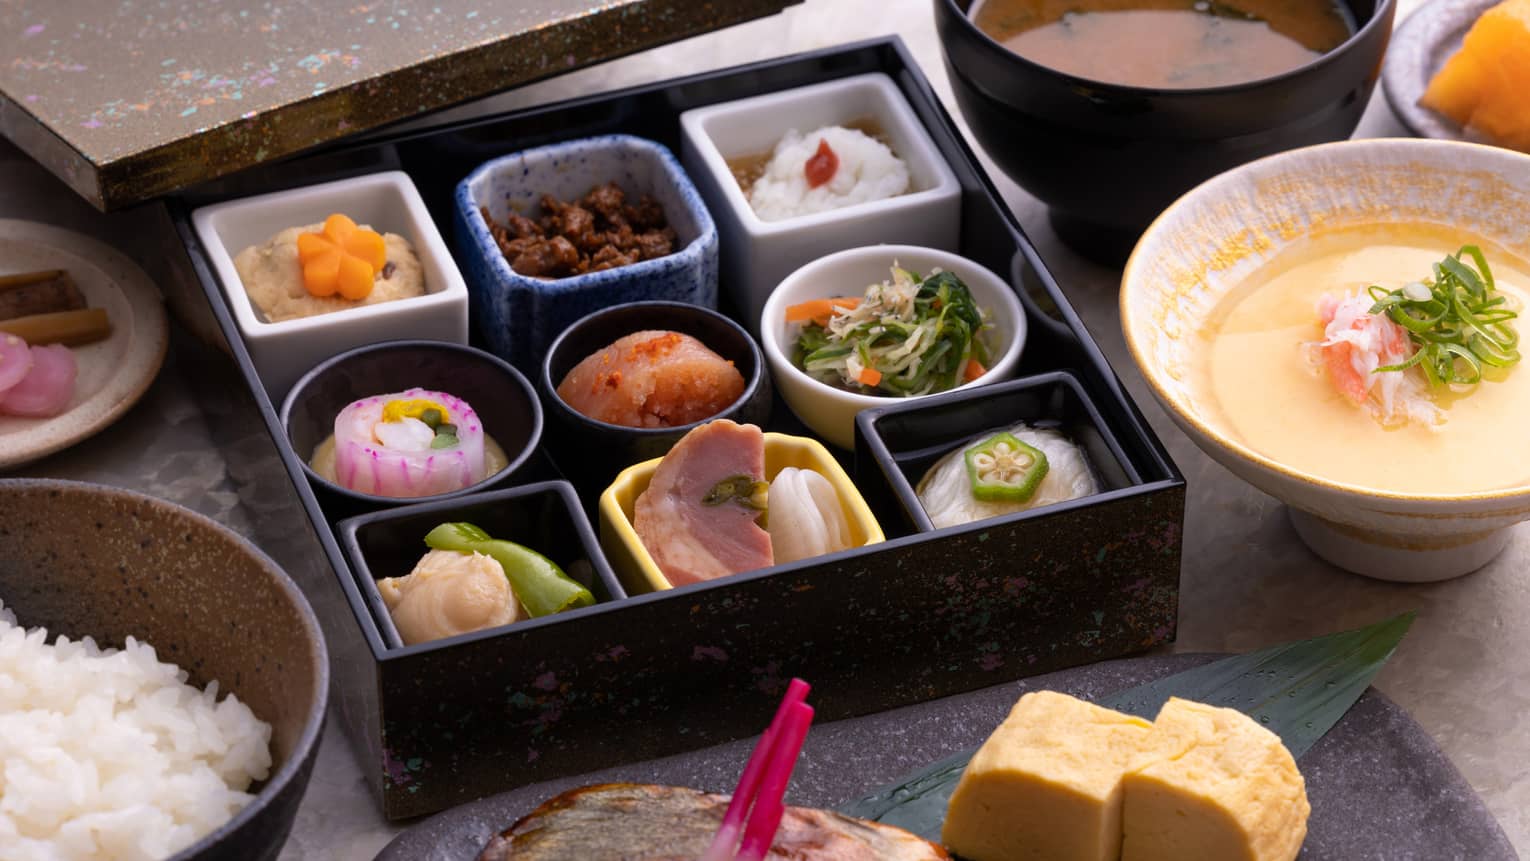 Traditional Japanese bento box breakfast with obanzai side dishes, tamagoyaki (Japanese rolled omelette), congee, steamed rice and miso soup